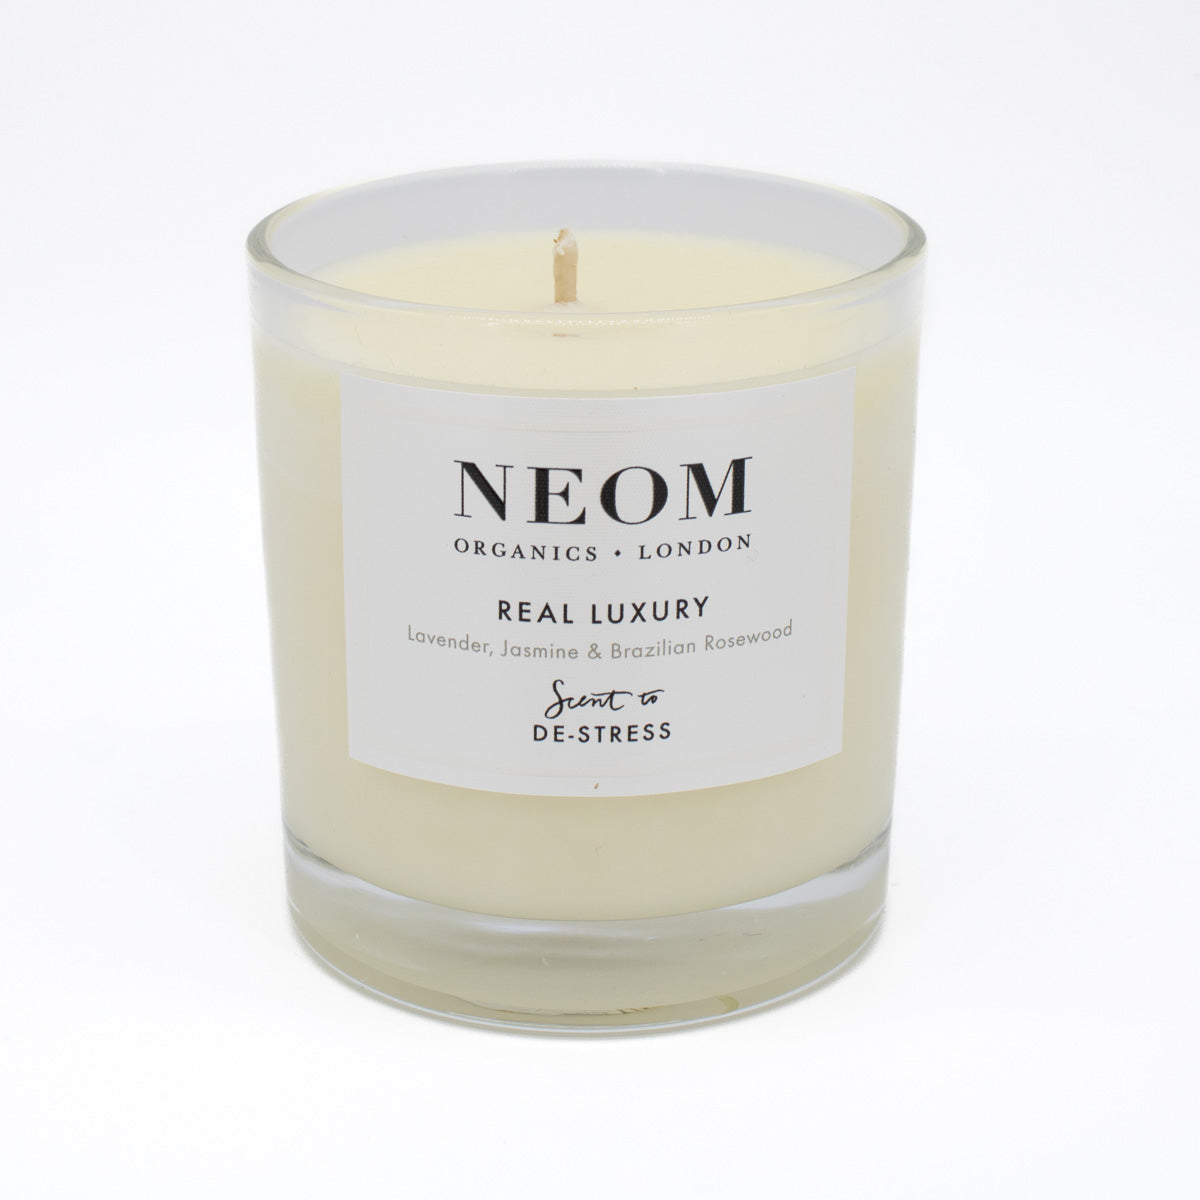 NEOM Real Luxury Scented Candle DE-STRESS 6.52oz- Missing Box